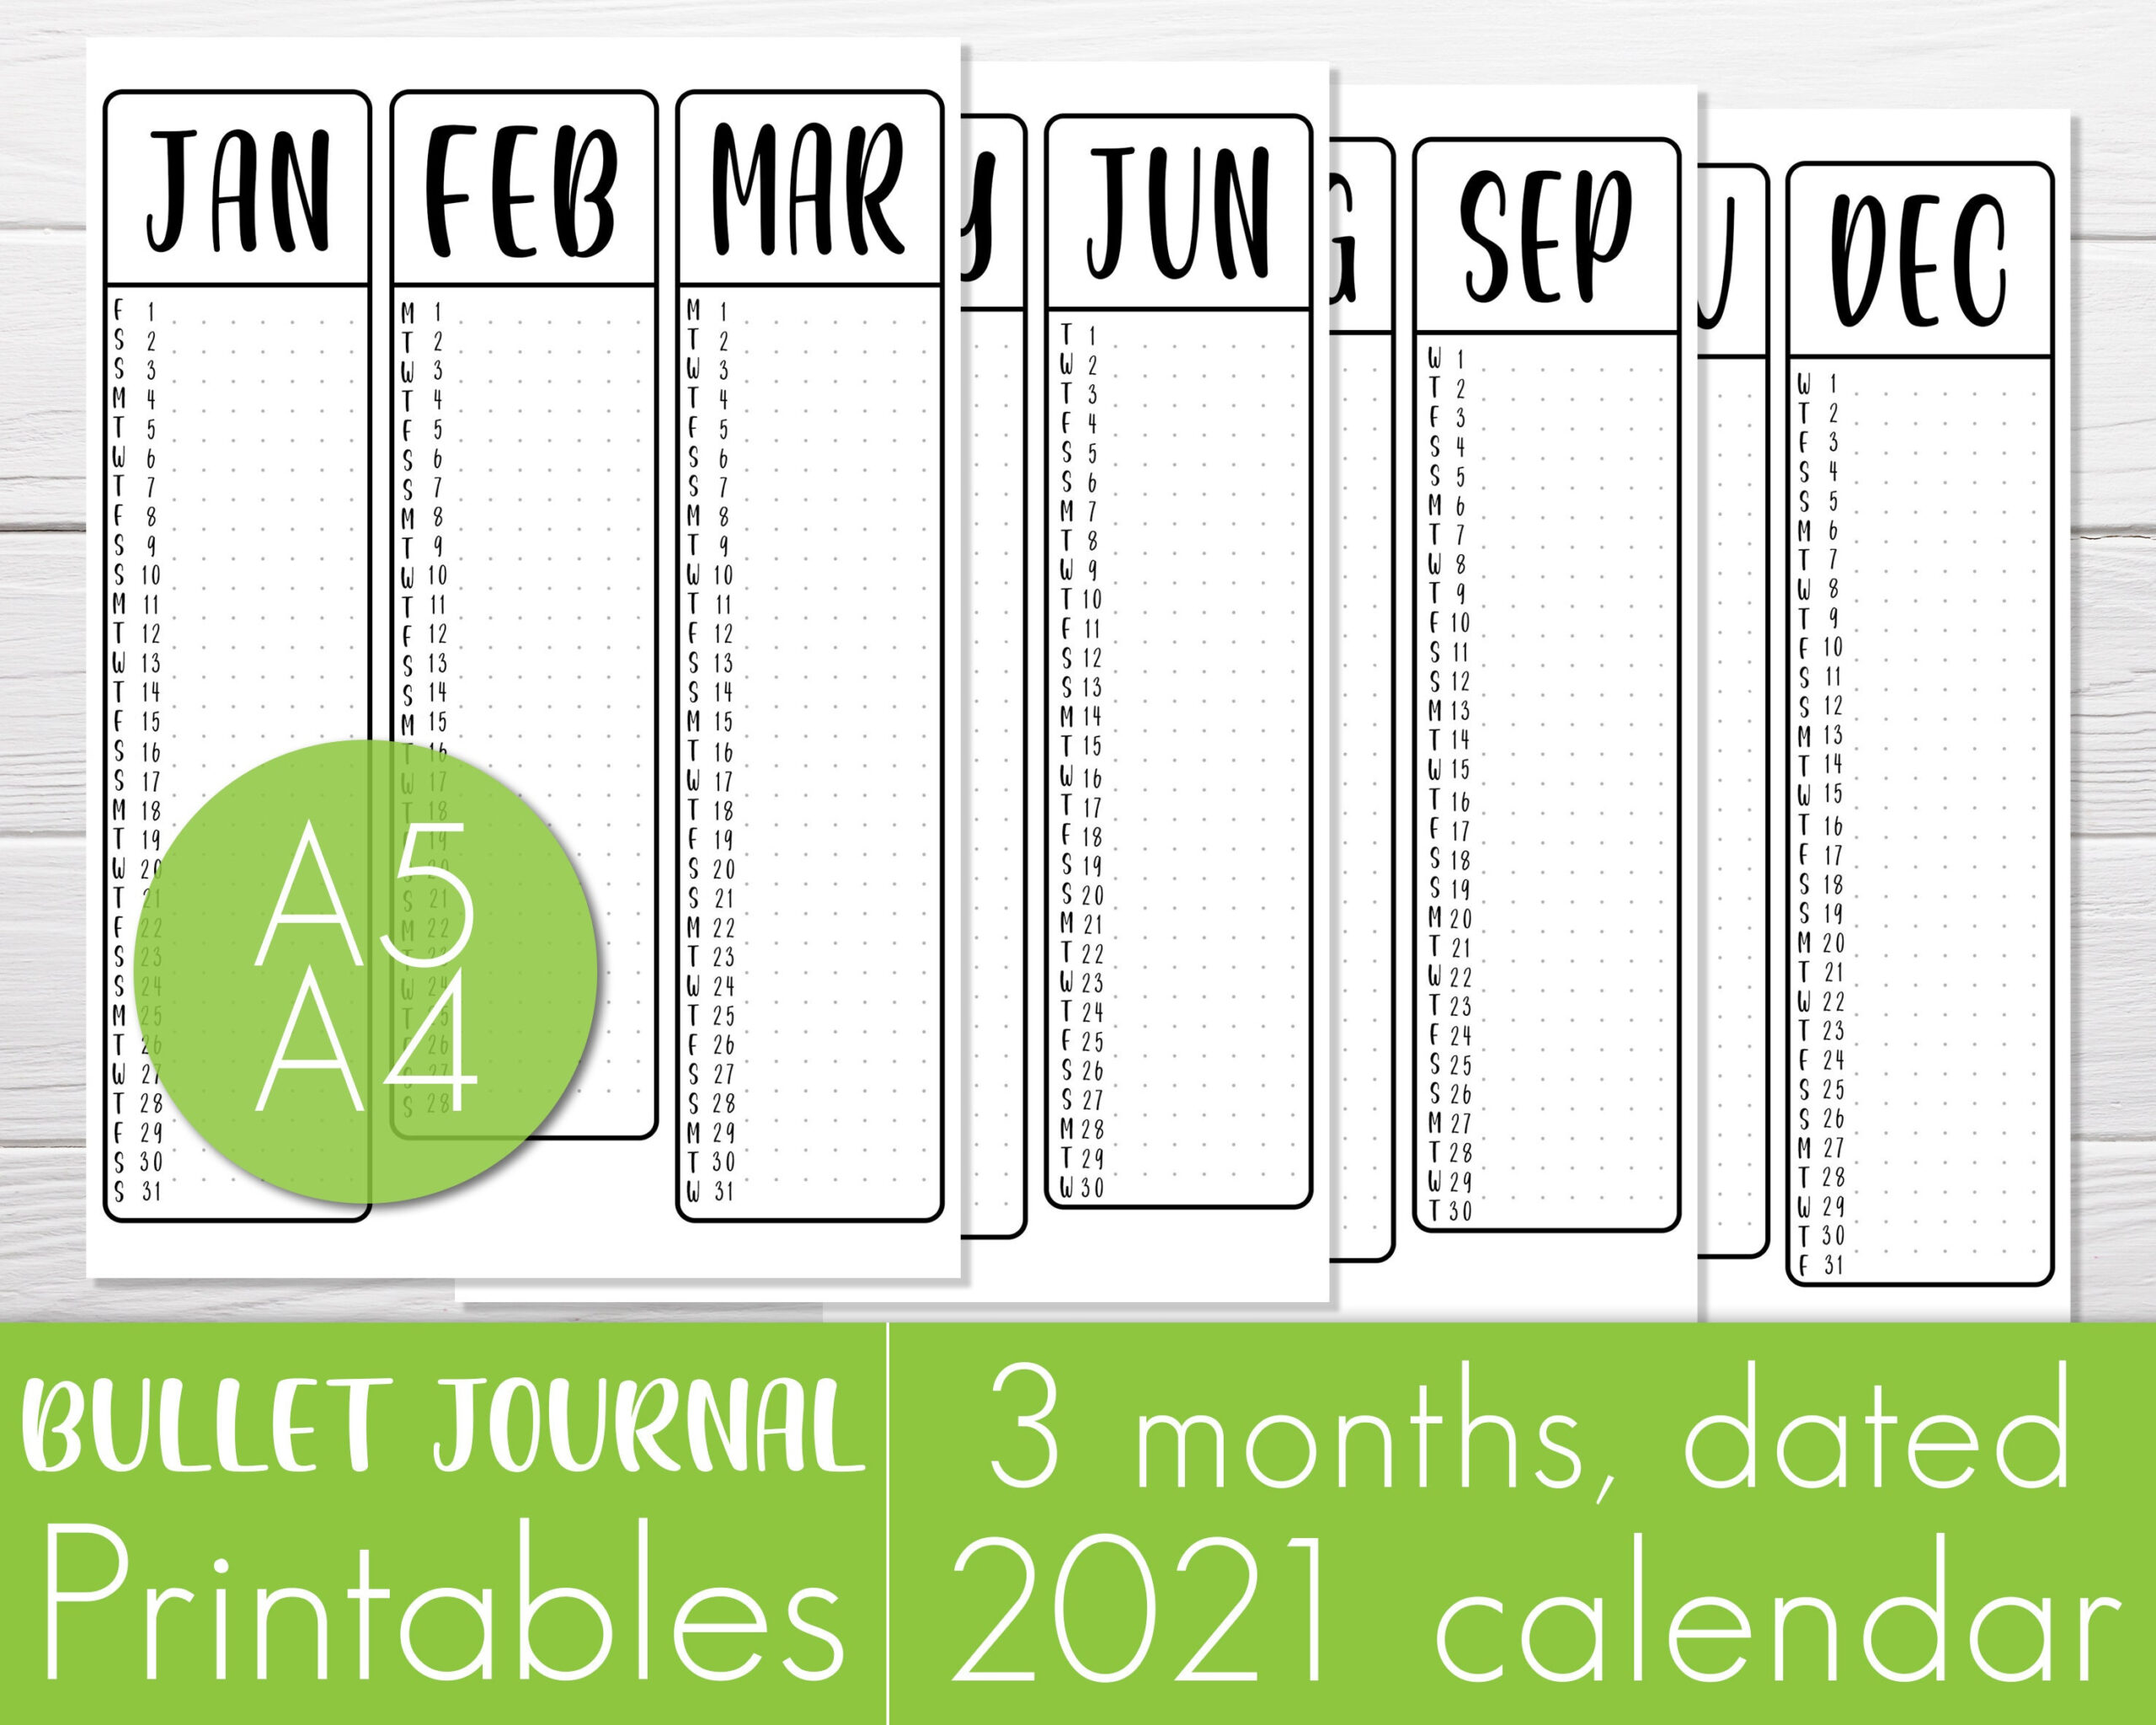 2021 Calendar 3 Months On One Page Planner Printable | Etsy within 3 Month Calendar 2021 Printable